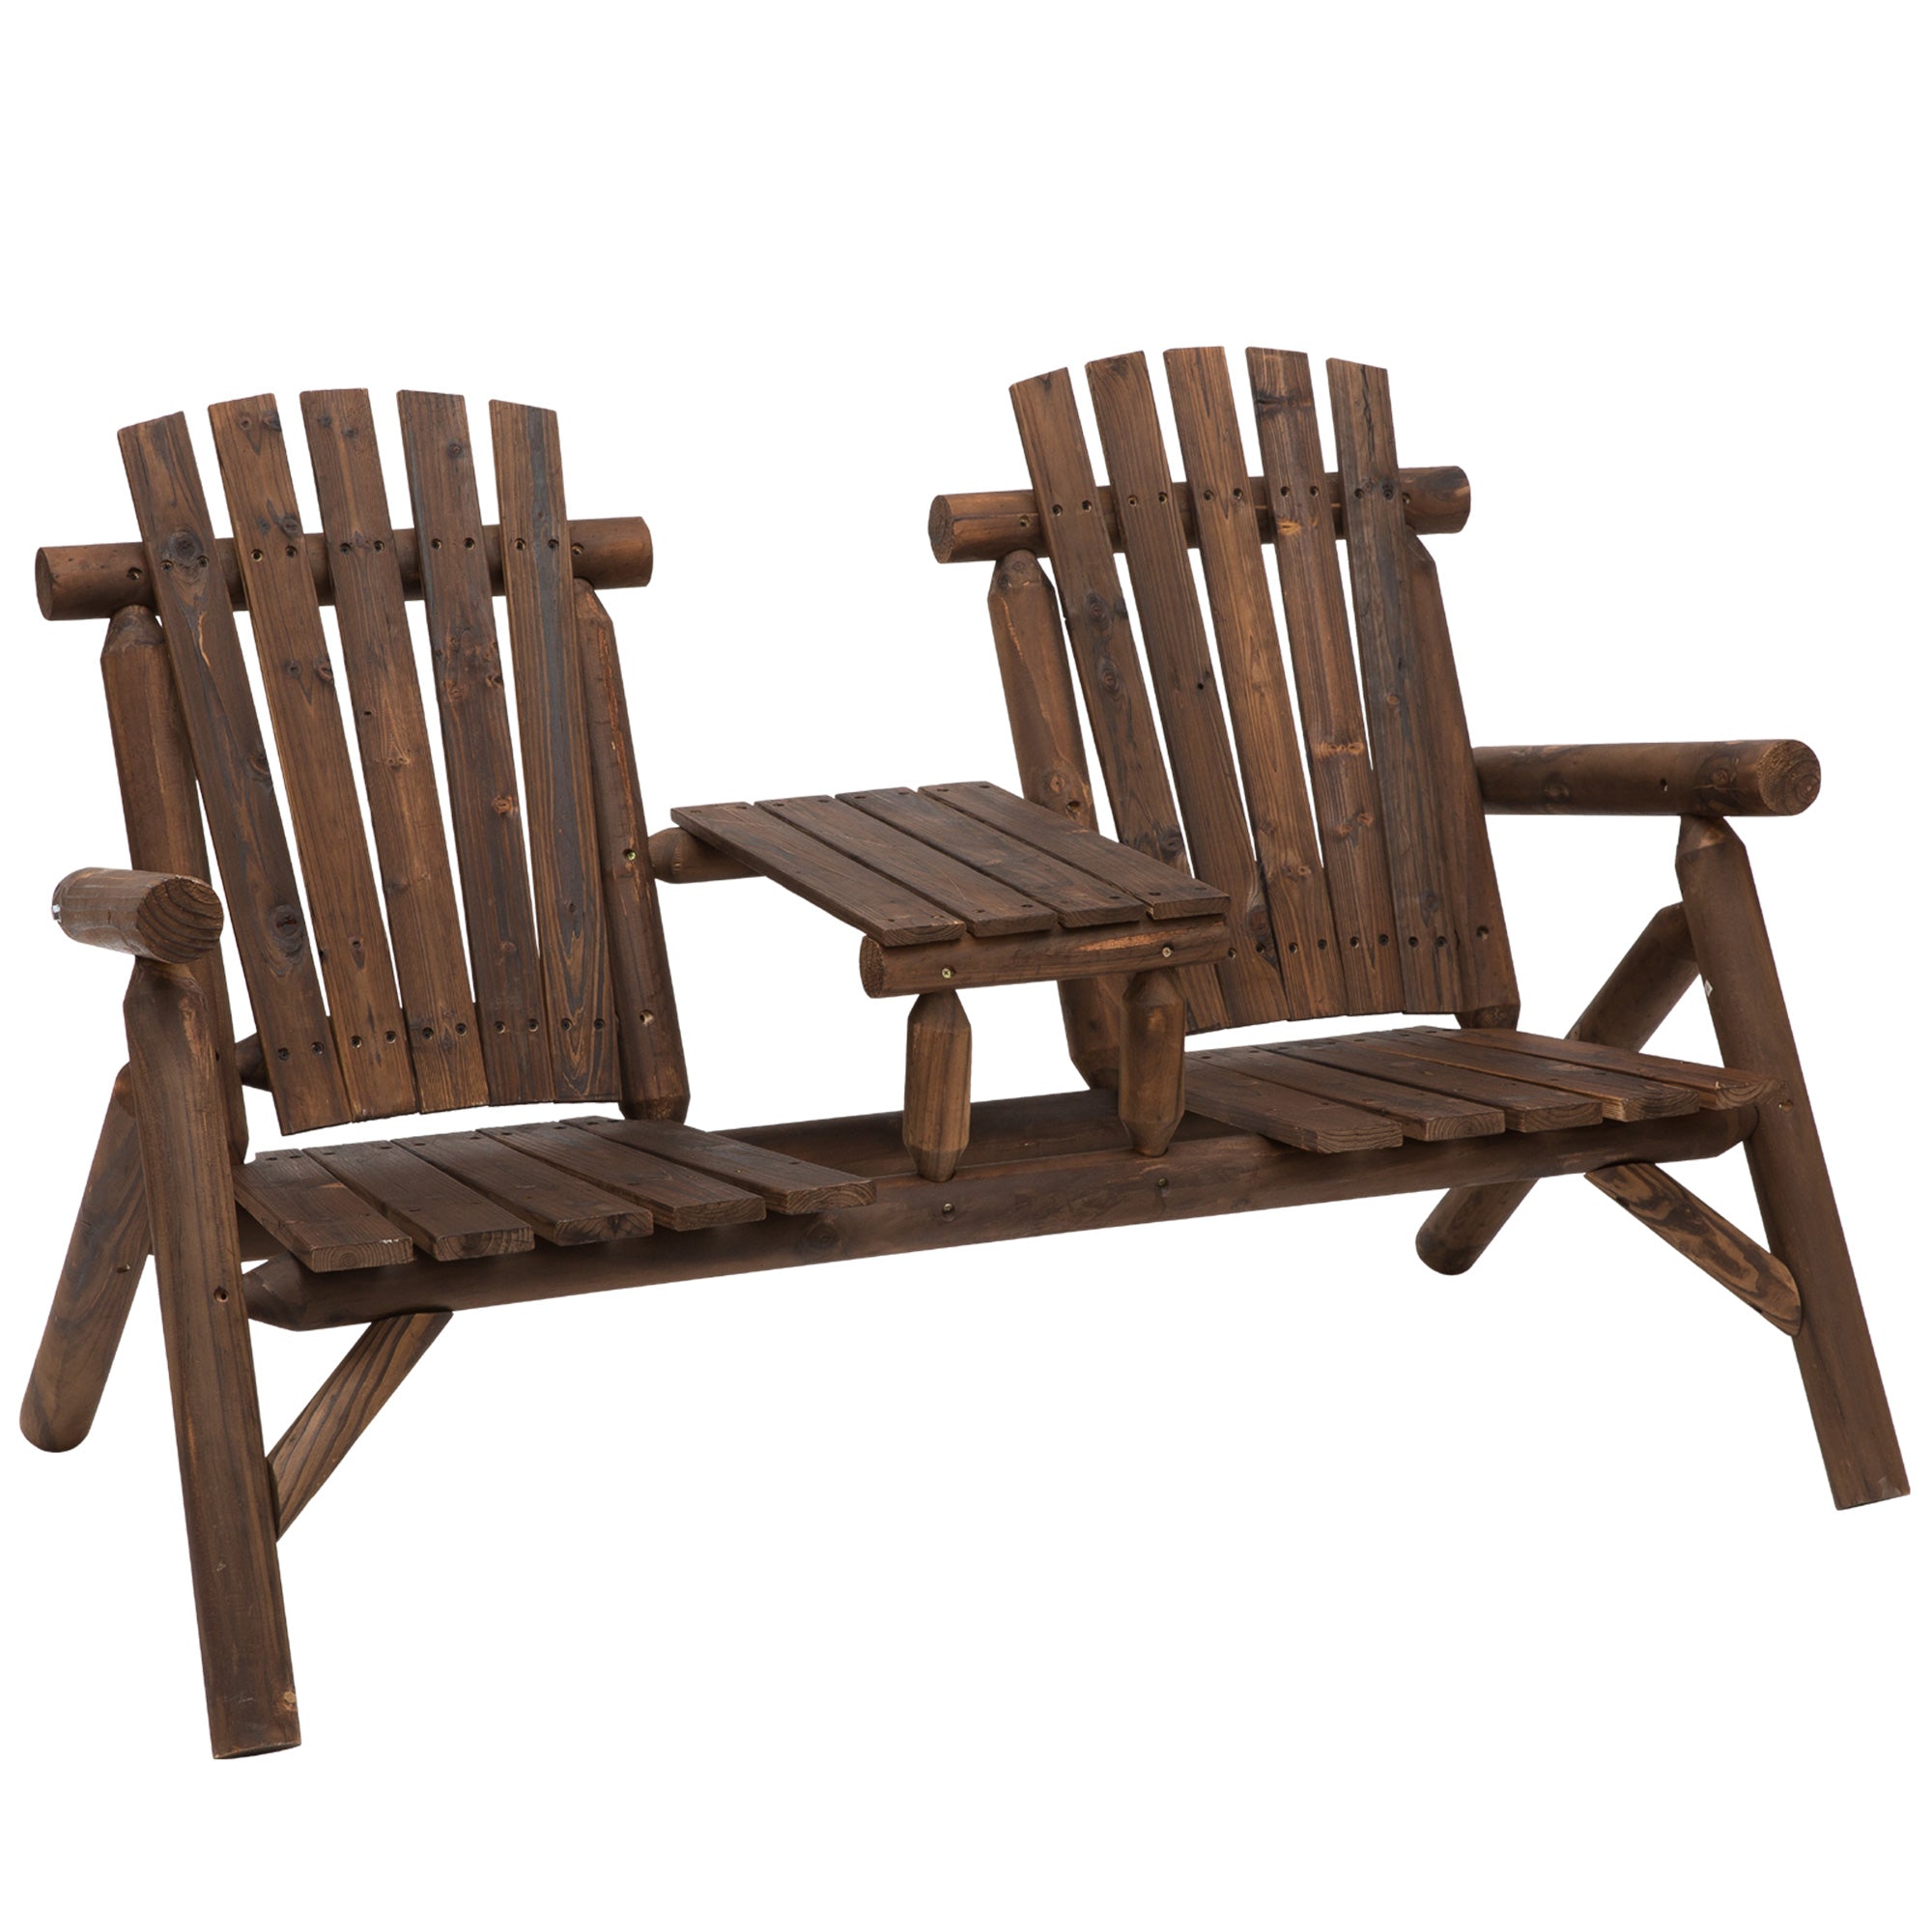 Wood Patio Chair Bench 2 Seats with Center Coffee Table, Garden Loveseat Bench Backyard, Perfect for Lounging Relaxing Outdoors, Carbonized-0